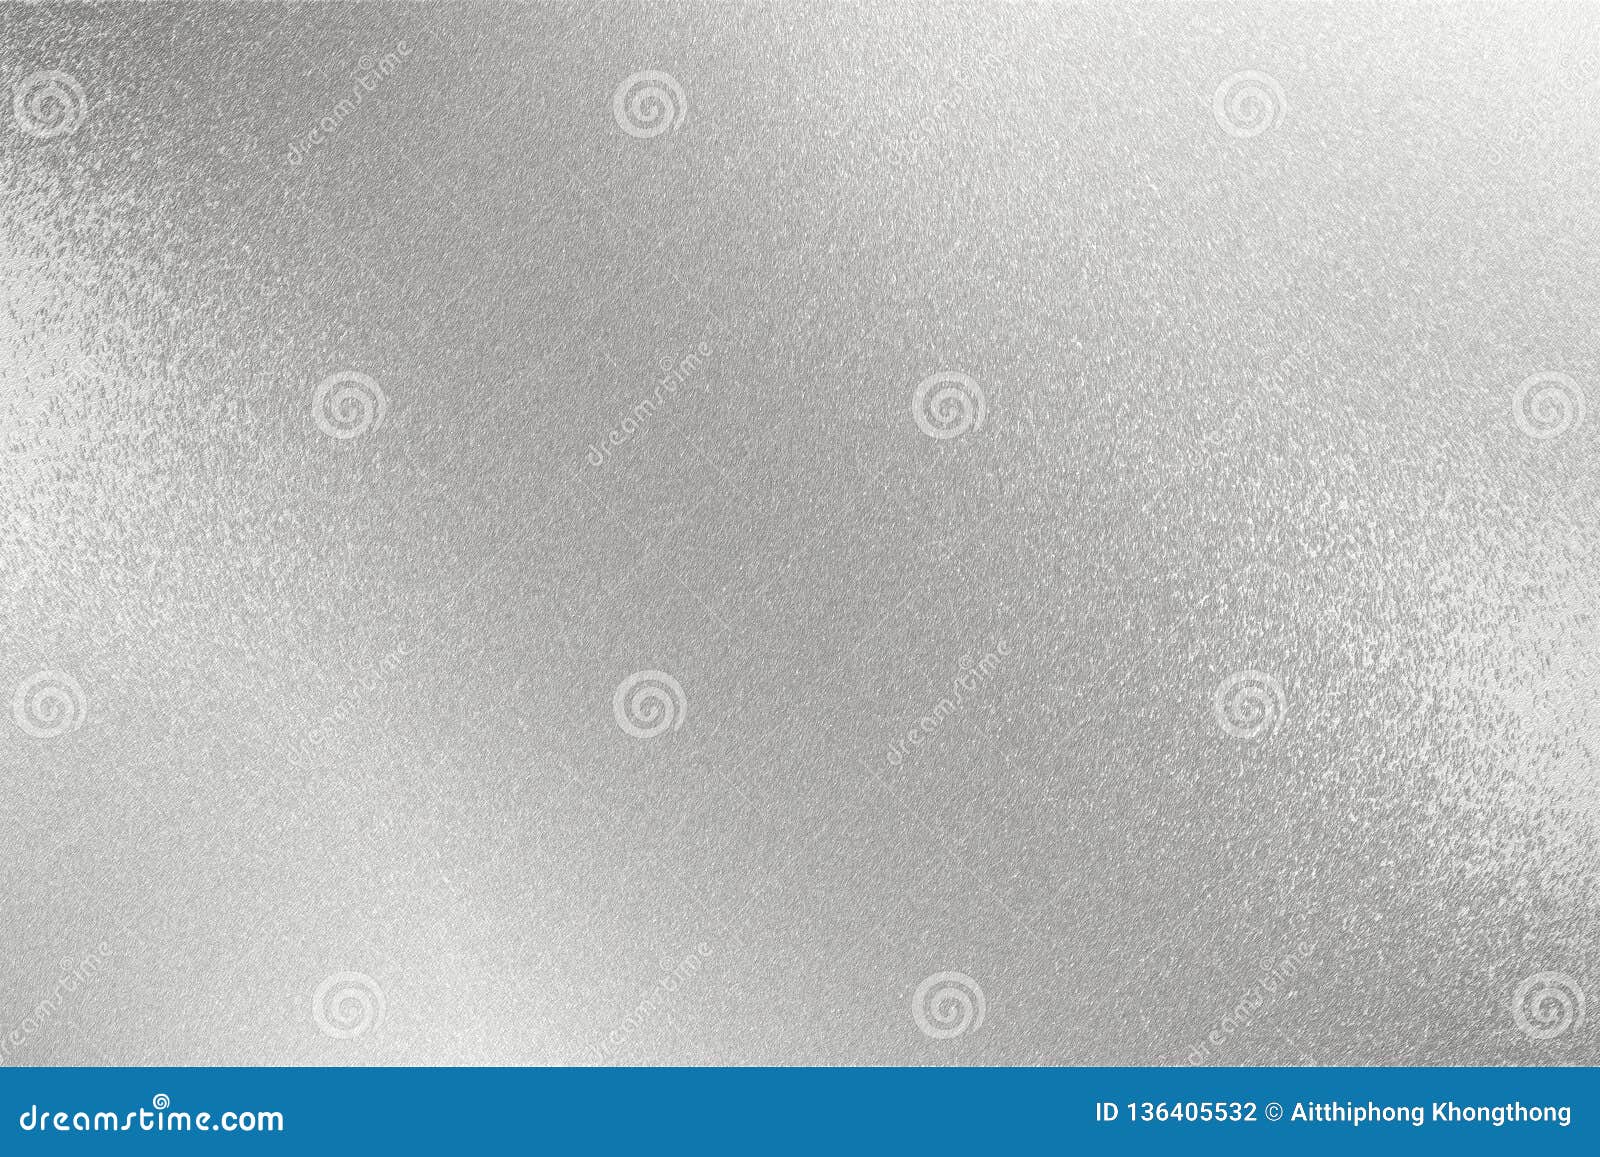 Texture of Reflection on Rough Silver Metal Wall, Abstract Background ...